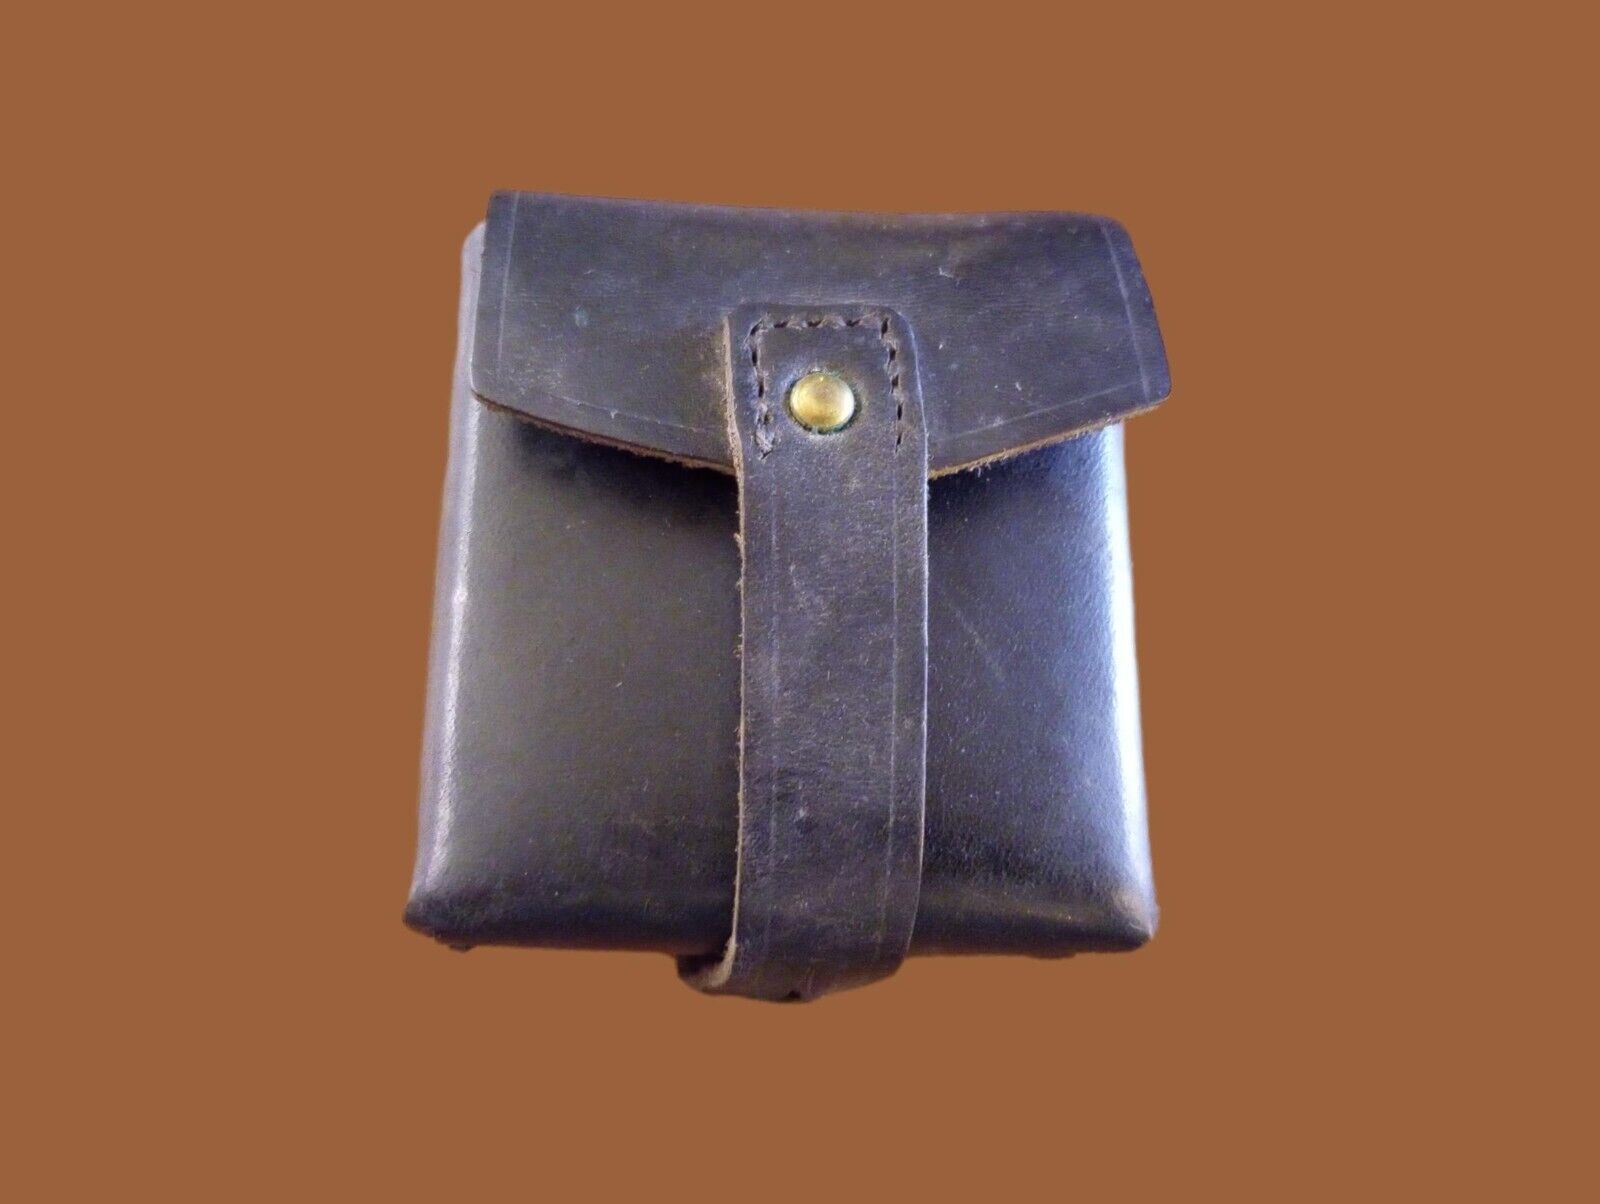 ORIGINAL WWII ITALIAN MILITARY BLACK LEATHER CARCANO AMMO 2 CLIP POUCH